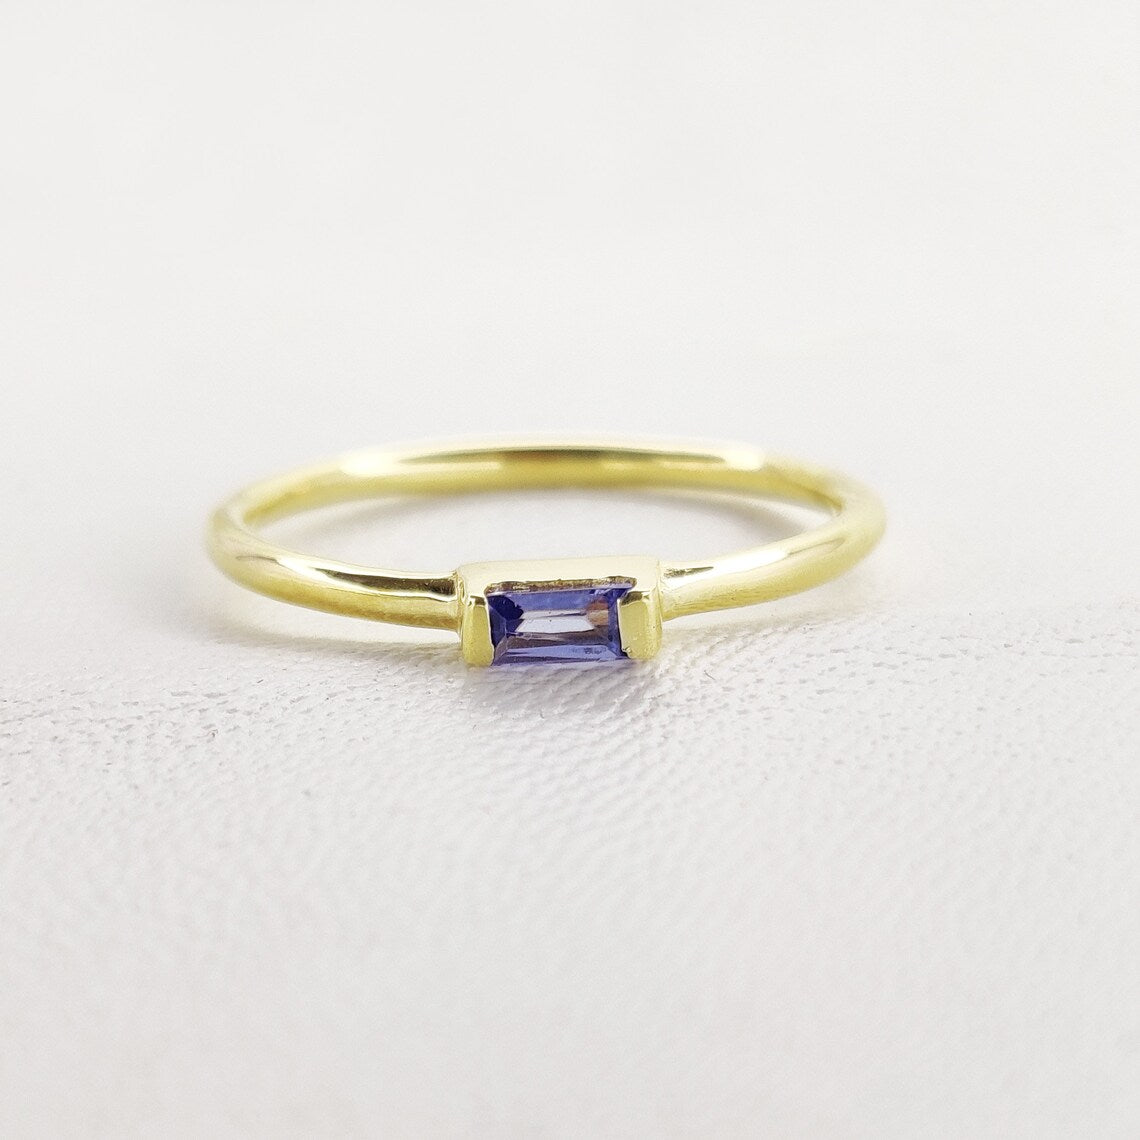 Tanzanite Baguette Gold Ring, Minimalist Ring, December Birthstone Jewelry, Lilac Gemstone Ring, Art Deco Stacking Ring, Dainty Ring